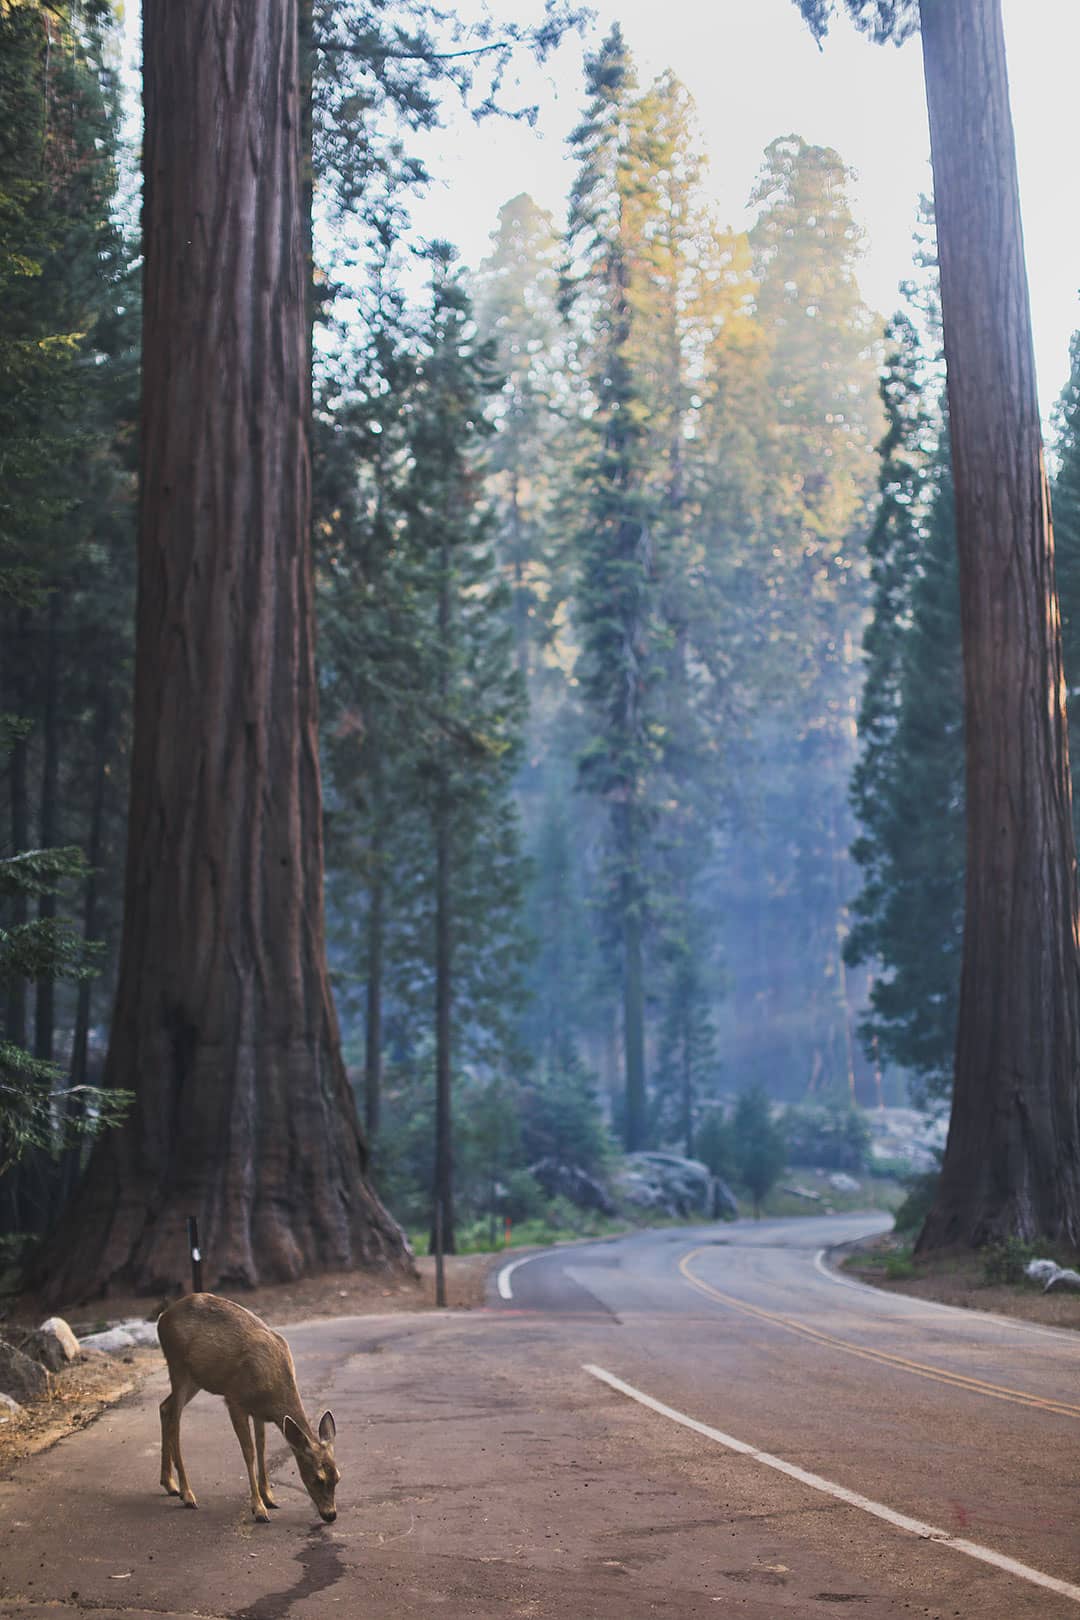 Visiting Sequoia National Park